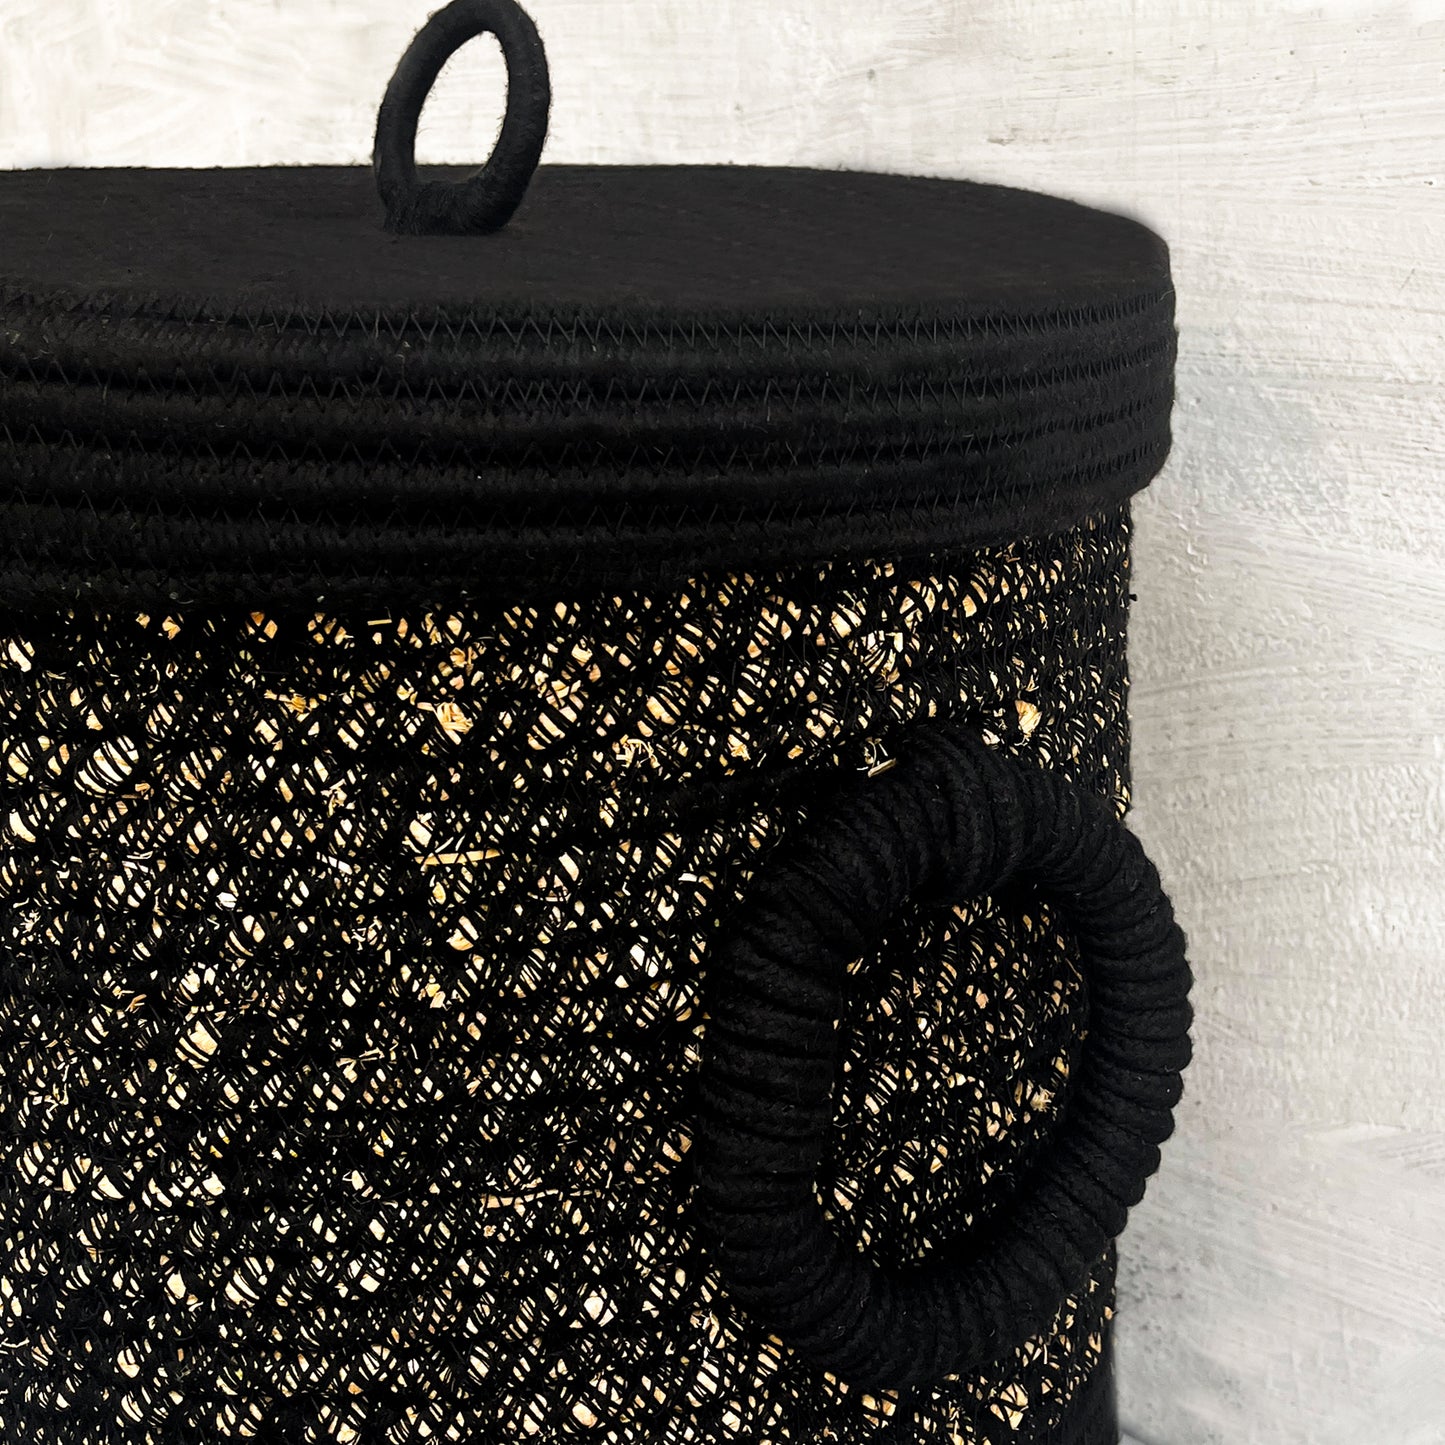 Golden-textured Black Laundry Basket with Lid and Bottom Spacers